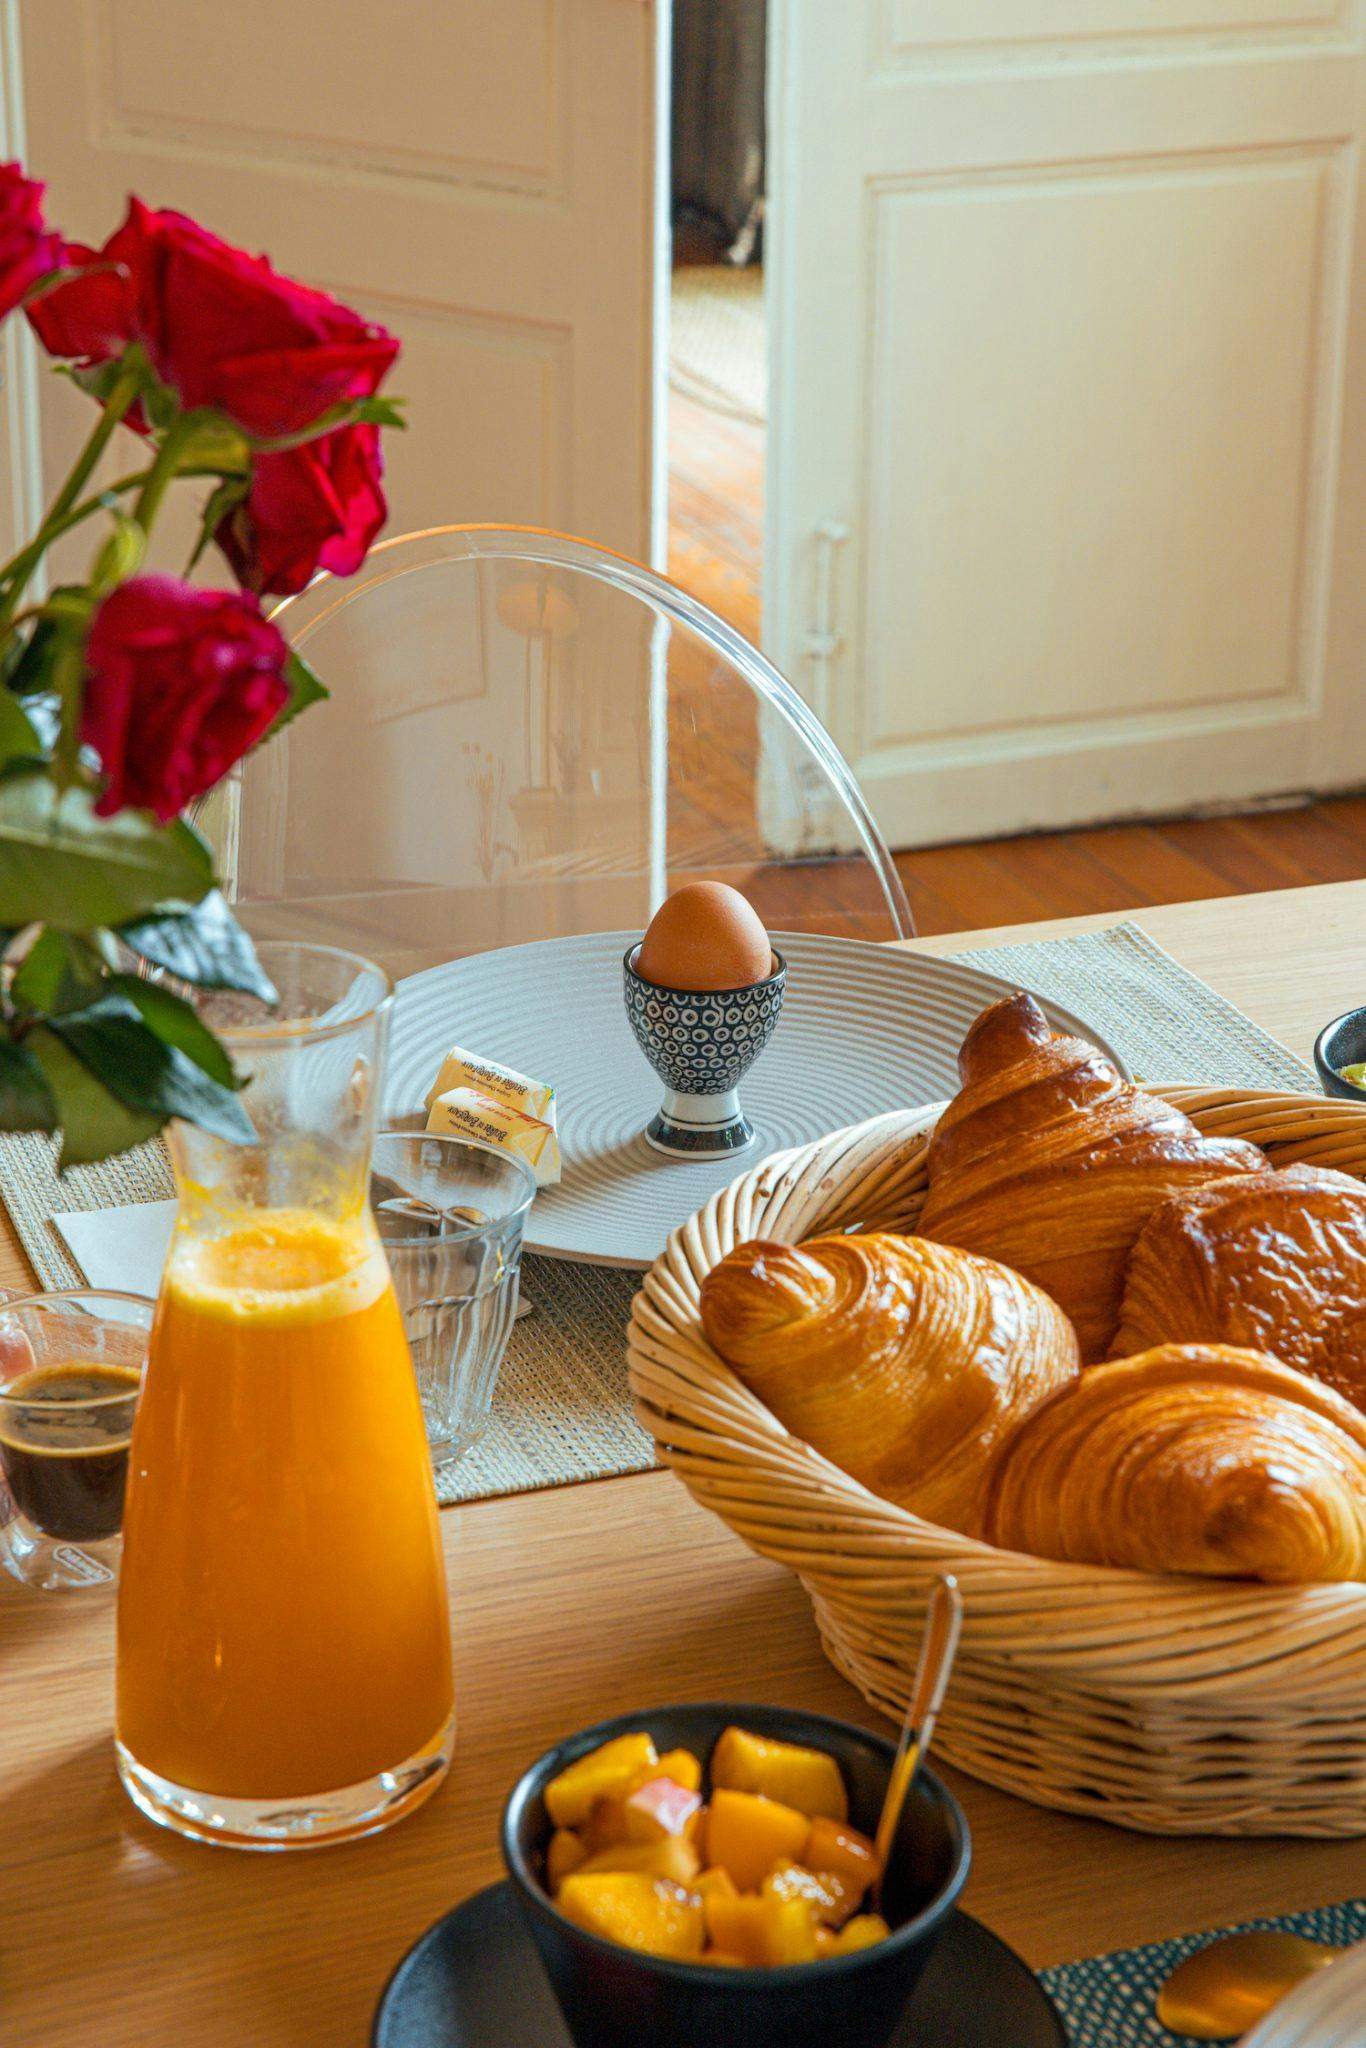  The hearty breakfast at Clos Marcamps: the perfect companion for a day of exploration in Bourgeais.